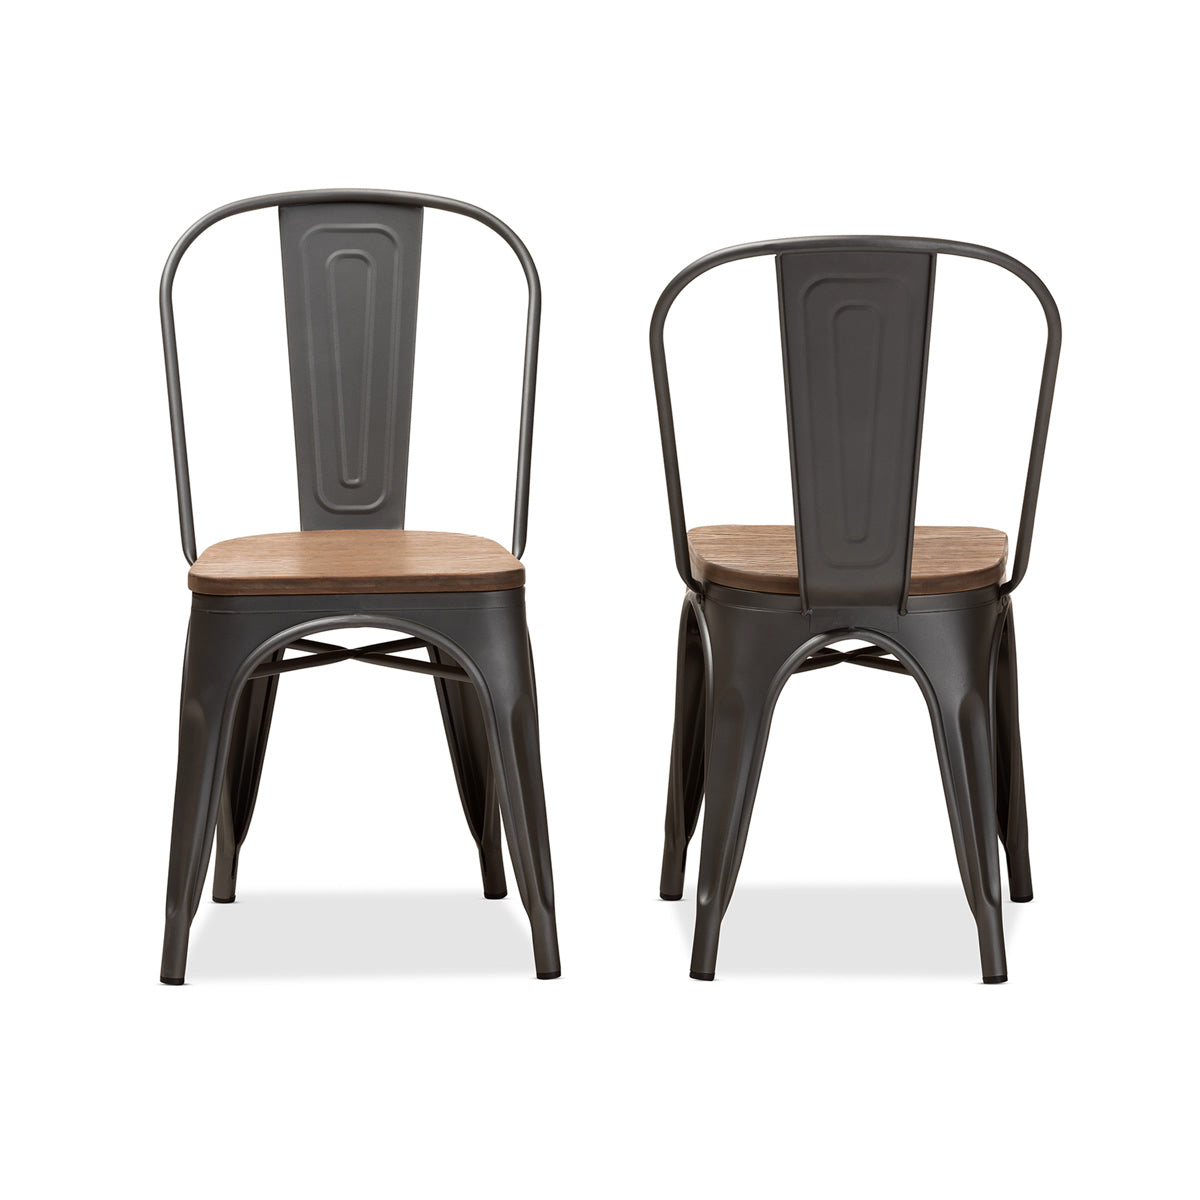 Baxton Studio Henri Vintage Rustic Industrial Style Tolix-Inspired Bamboo and Gun Metal-Finished Steel Stackable Dining Chair Set of 2 Baxton Studio-dining chair-Minimal And Modern - 2